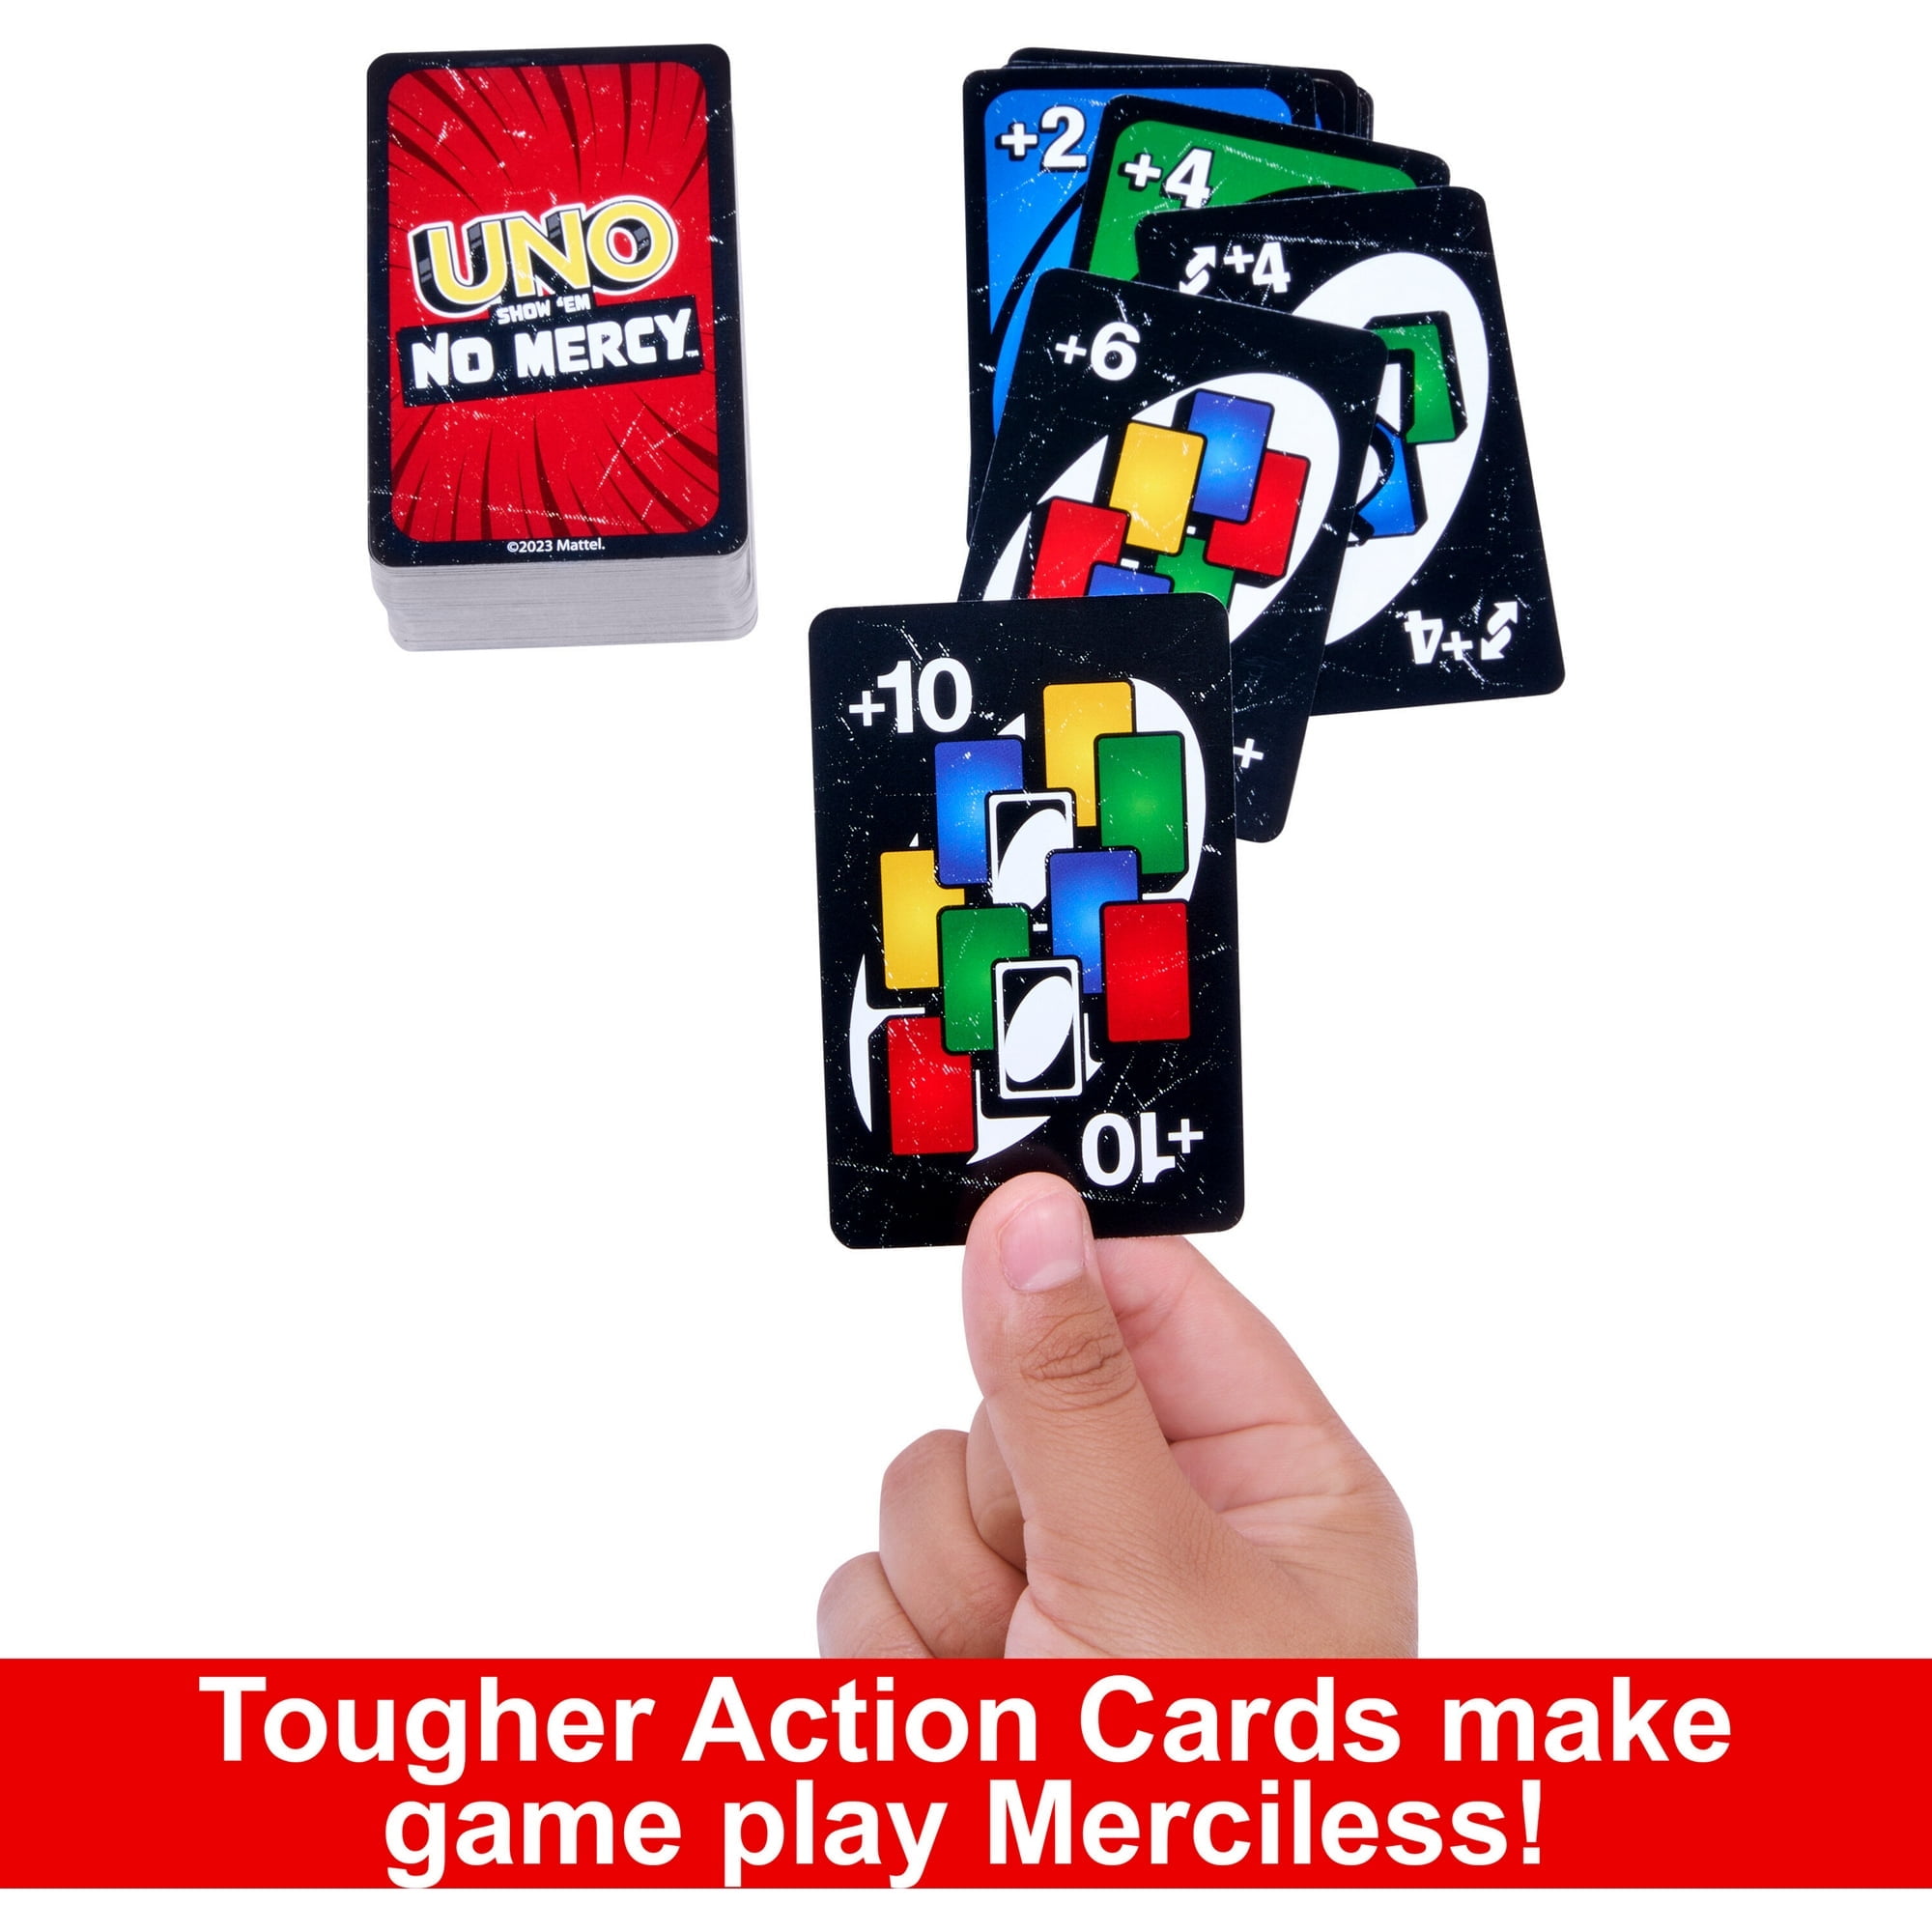 UNO on X: Brutal. Ruthless. Unapologetic. Introducing UNO Show 'Em No Mercy  with tougher rules and stiffer penalties making THIS the most ruthless game  of UNO yet. Get yours now @Walmart.  /